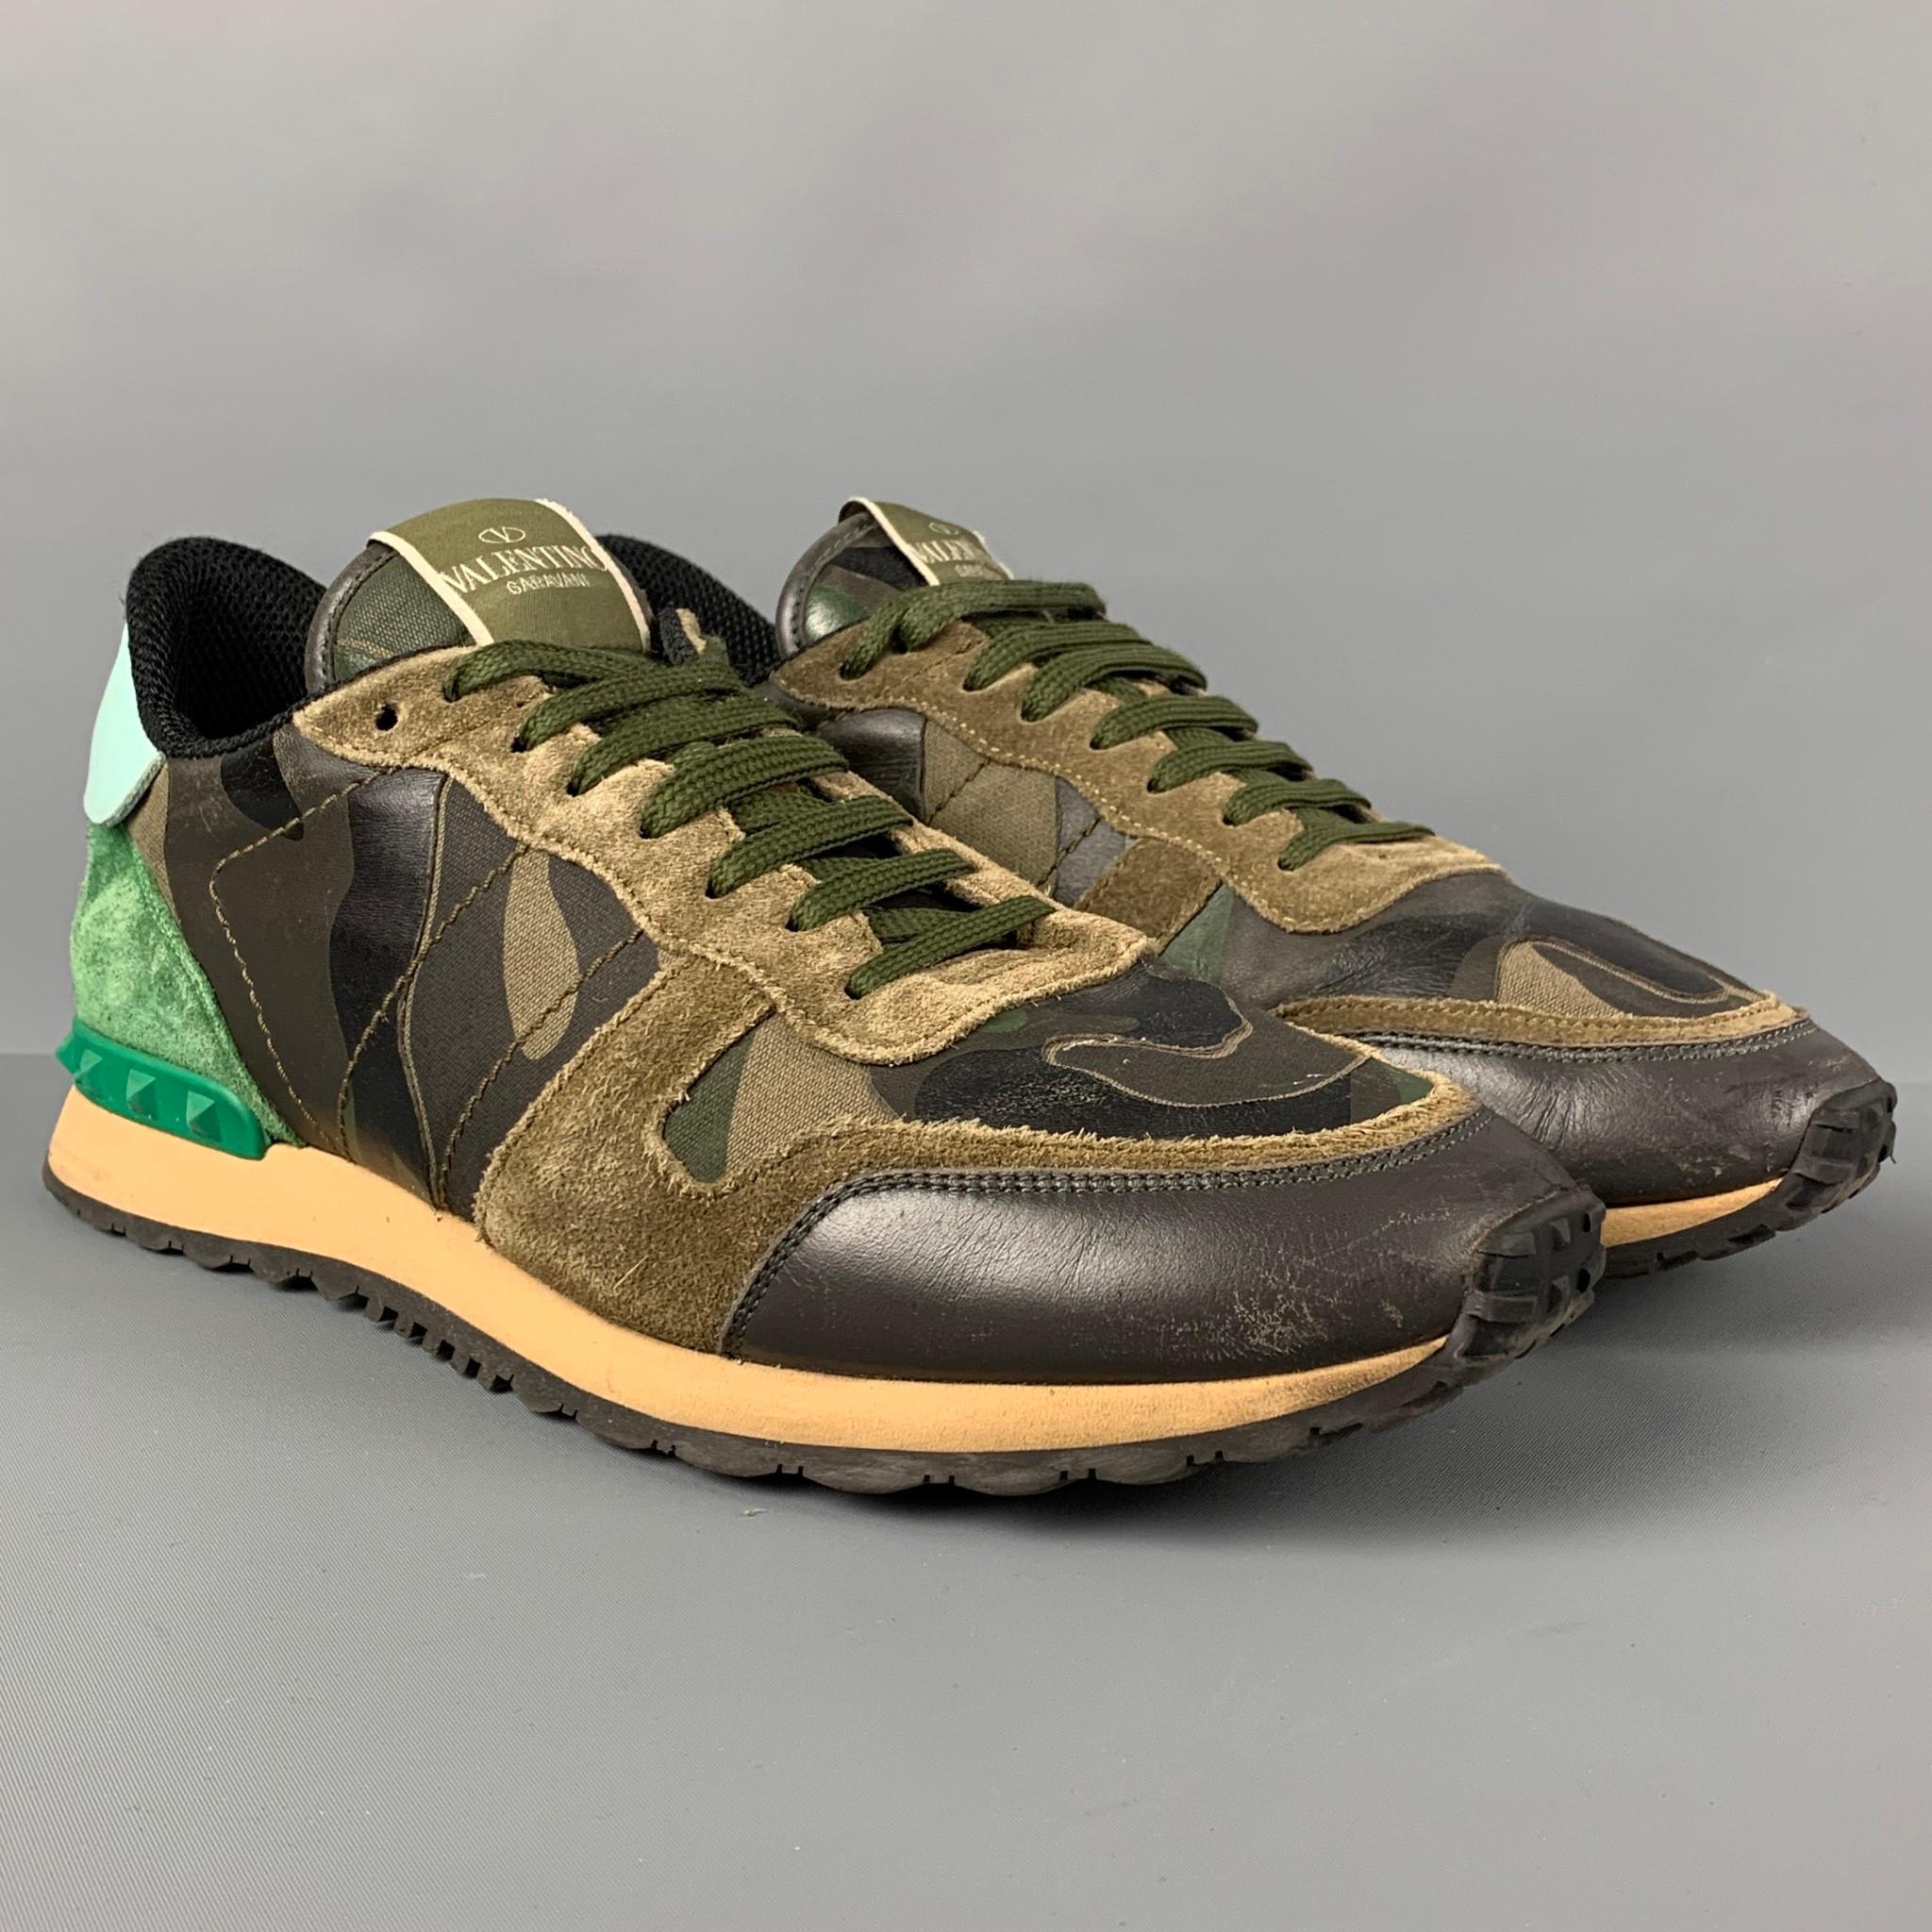 VALENTINO sneakers comes in a olive & brown camo leather featuring a suede trim, rubber stud details, and a lace up closure. Made in Italy. 

Very Good Pre-Owned Condition.
Marked: Size tag removed.

Outsole: 12 in. x 4.25 in.